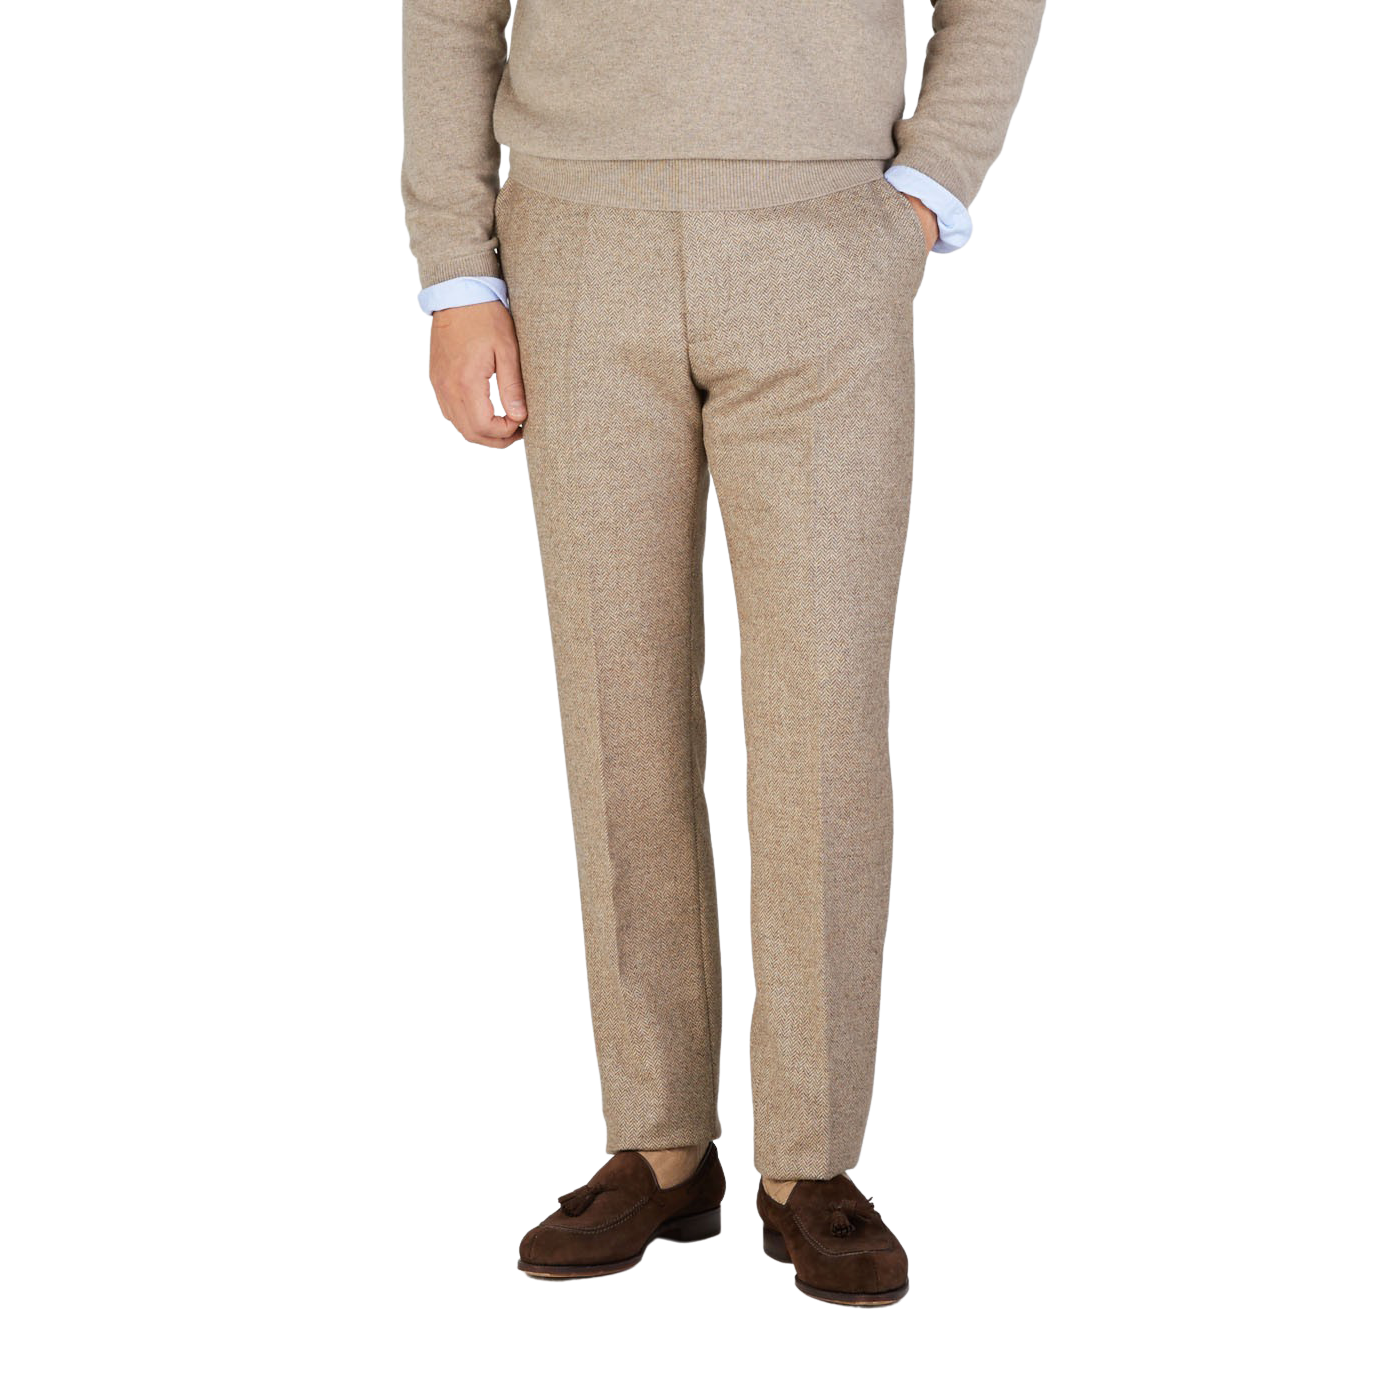 Marc Darcy - Ted Tan Tweed Trousers - Furbellow & Co